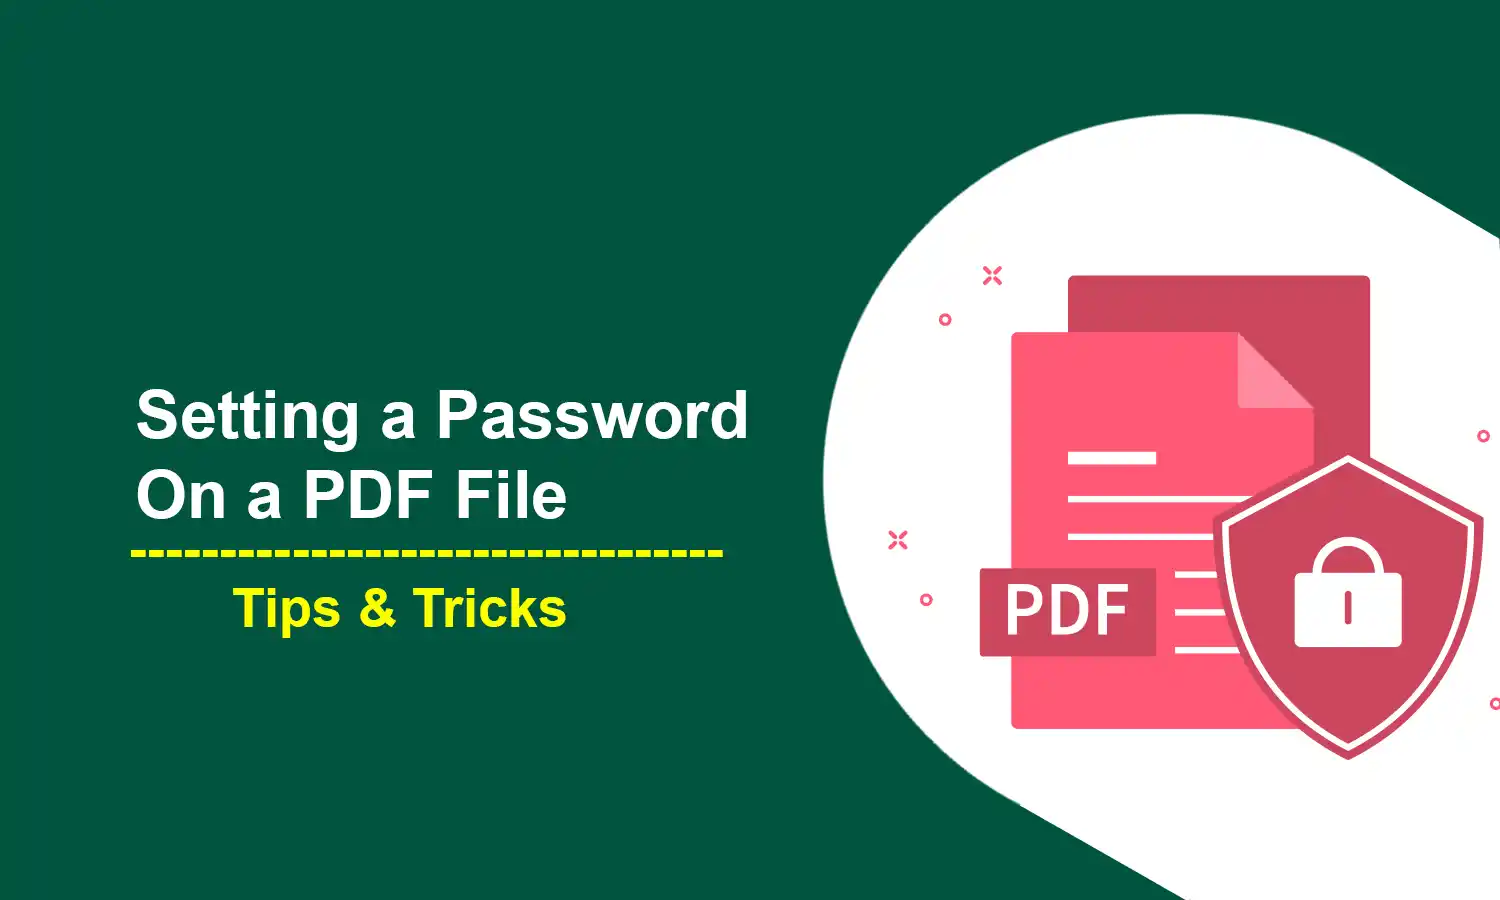 Setting a Password on a PDF File